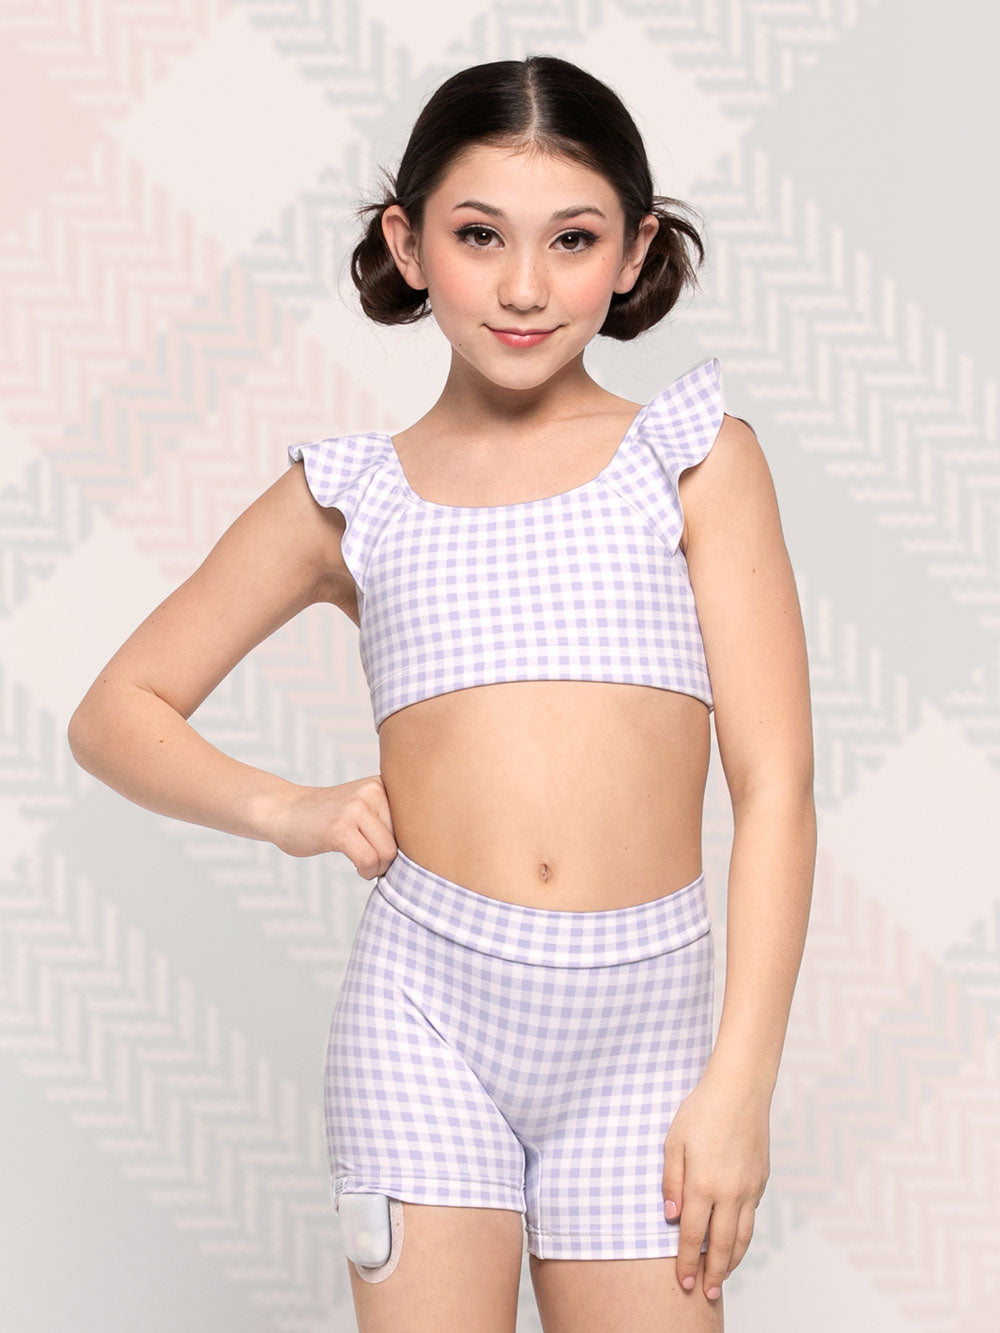 Kids cropped top